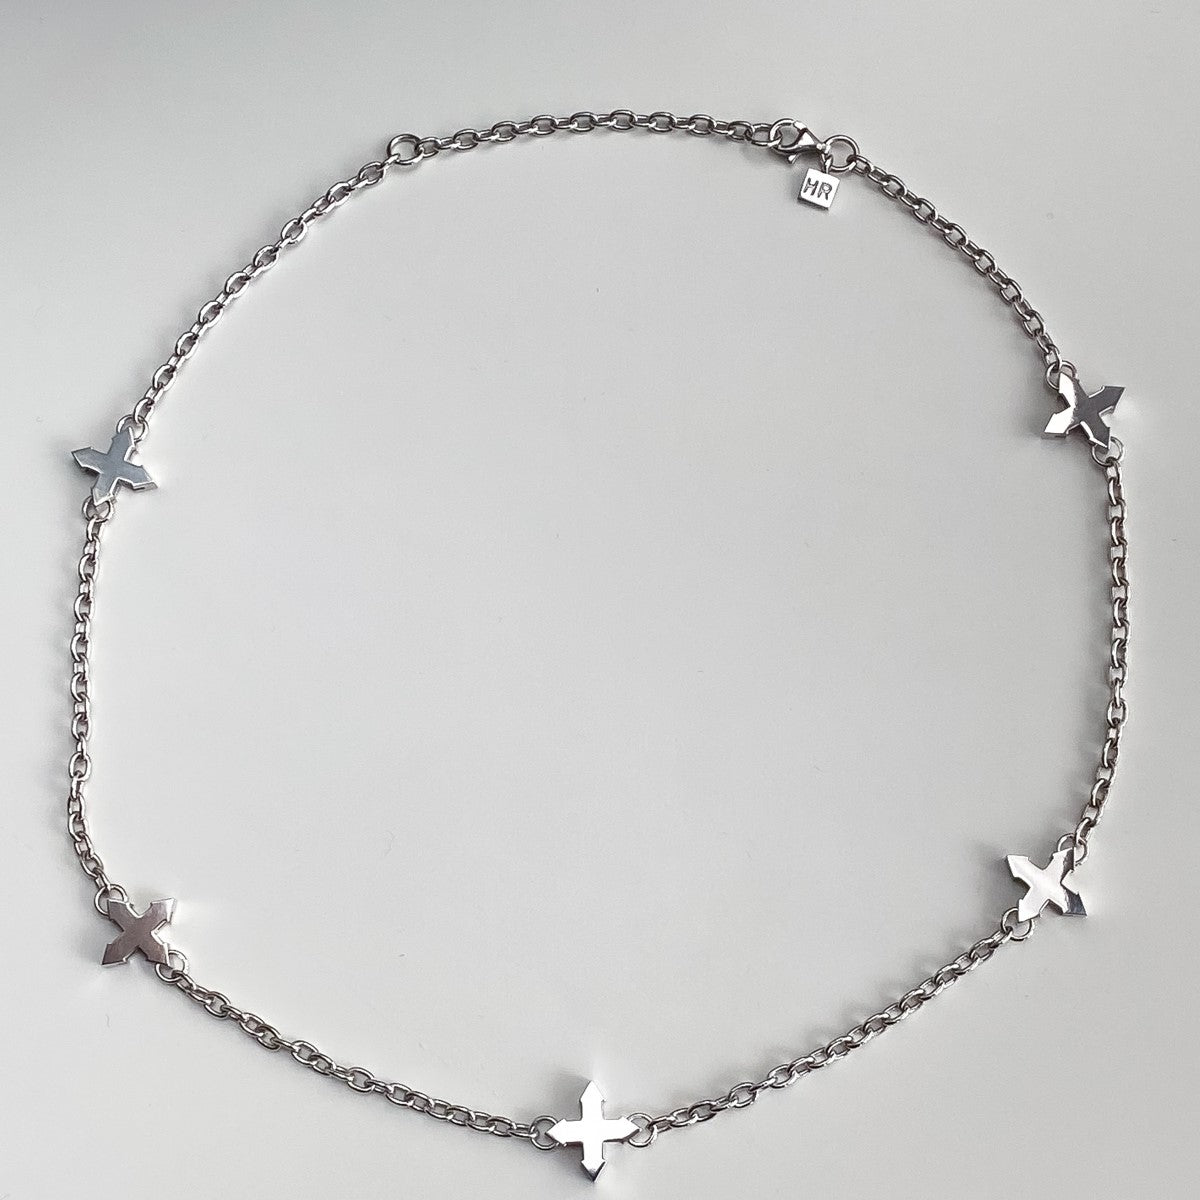 NECKLACE "FIVE STARS" / SILVER